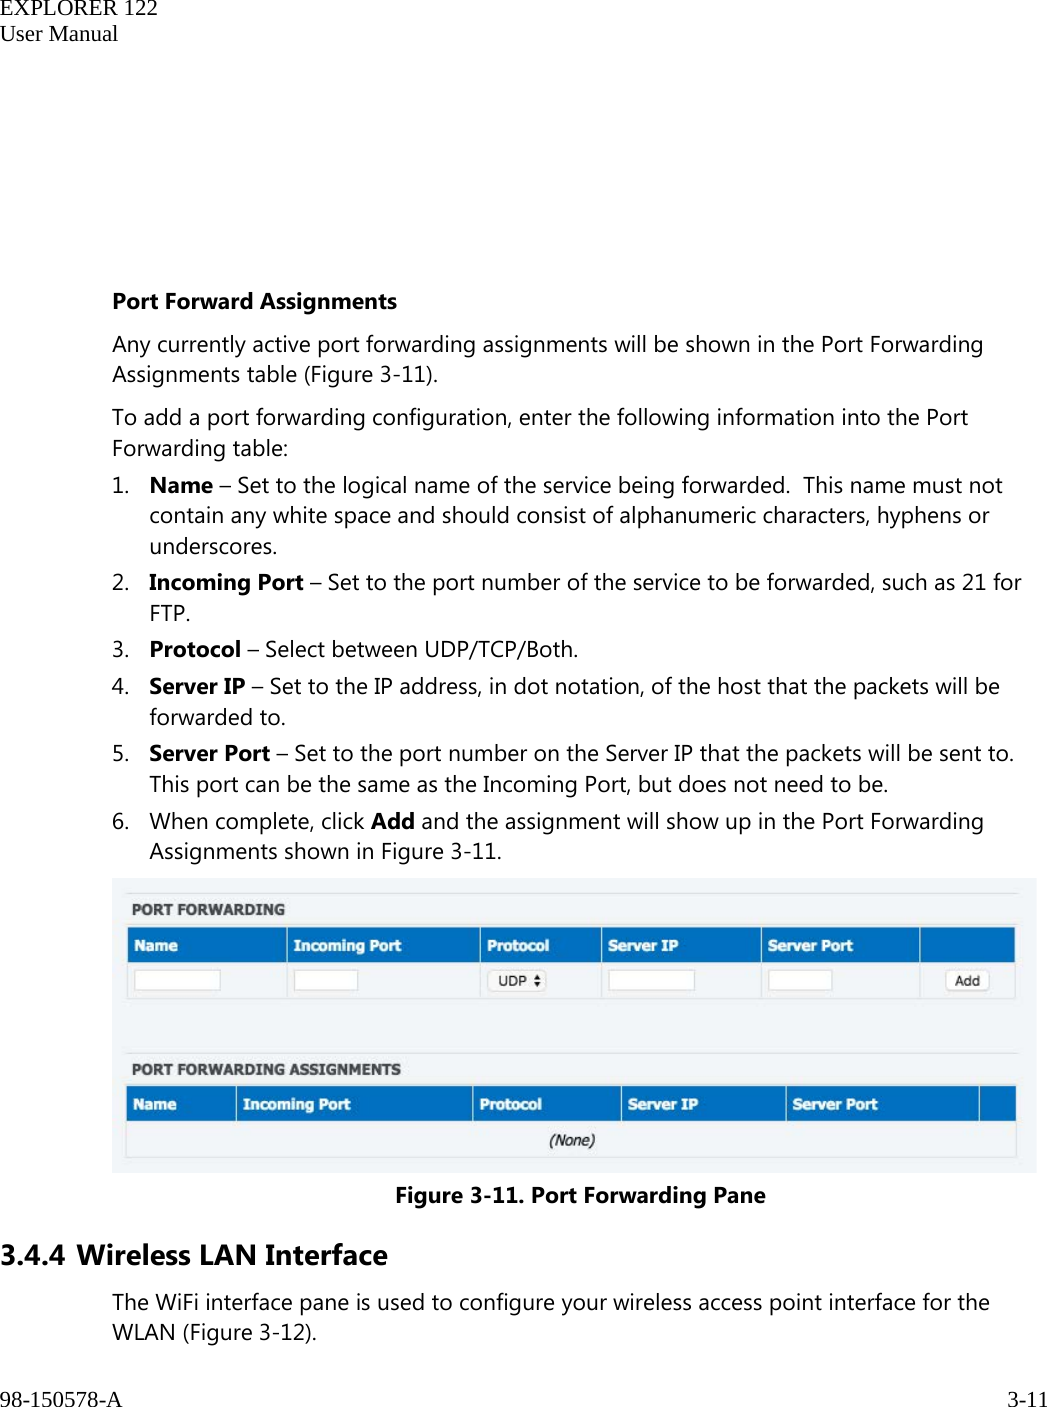   EXPLORER 122  User Manual  98-150578-A     3-11        Port Forward Assignments Any currently active port forwarding assignments will be shown in the Port Forwarding Assignments table (Figure 3-11). To add a port forwarding configuration, enter the following information into the Port Forwarding table: 1. Name – Set to the logical name of the service being forwarded.  This name must not contain any white space and should consist of alphanumeric characters, hyphens or underscores.  2. Incoming Port – Set to the port number of the service to be forwarded, such as 21 for FTP.  3. Protocol – Select between UDP/TCP/Both. 4. Server IP – Set to the IP address, in dot notation, of the host that the packets will be forwarded to. 5. Server Port – Set to the port number on the Server IP that the packets will be sent to.  This port can be the same as the Incoming Port, but does not need to be. 6. When complete, click Add and the assignment will show up in the Port Forwarding Assignments shown in Figure 3-11.  Figure 3-11. Port Forwarding Pane 3.4.4 Wireless LAN Interface The WiFi interface pane is used to configure your wireless access point interface for the WLAN (Figure 3-12).  